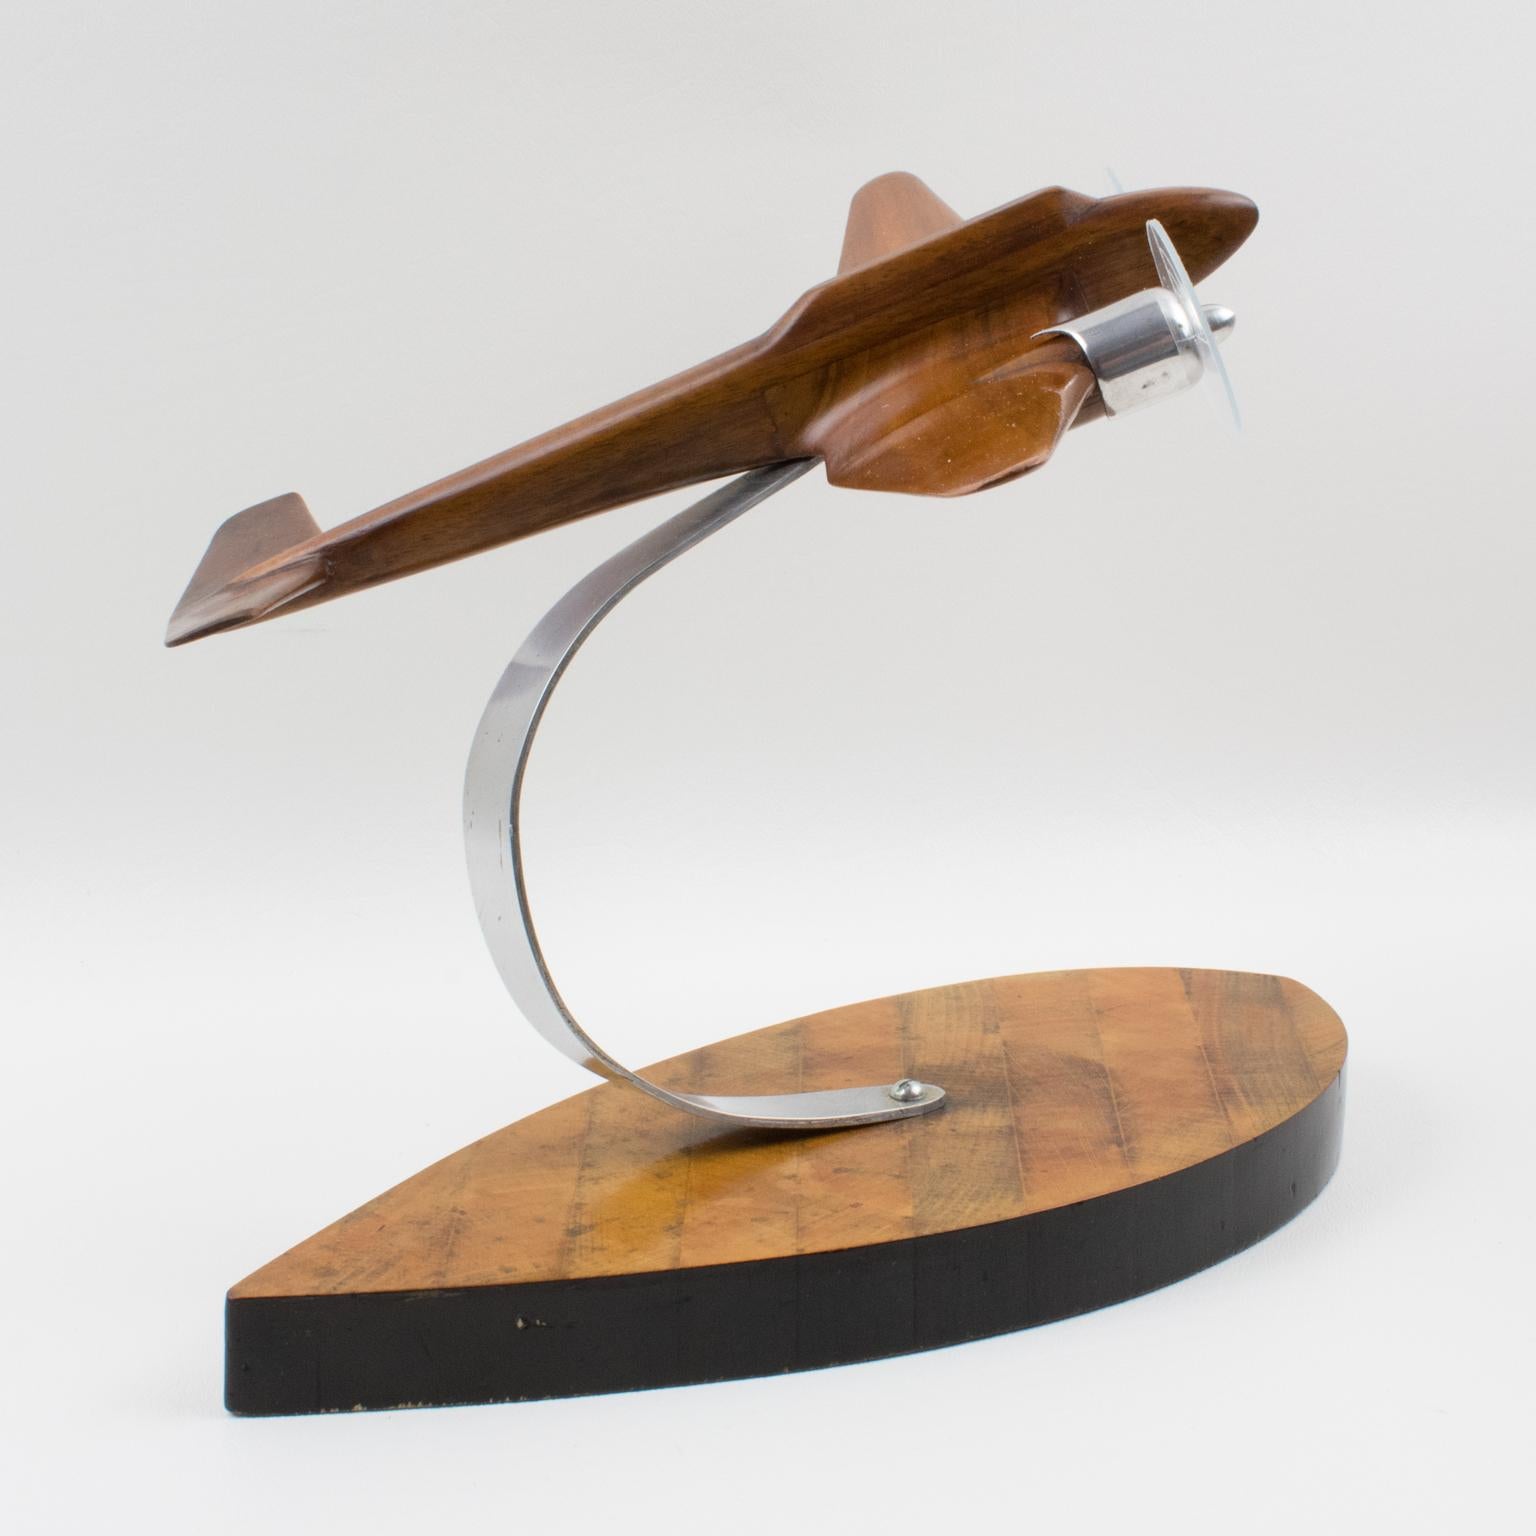 French Art Deco, 1940s Wooden and Aluminum Airplane Aviation Model 5